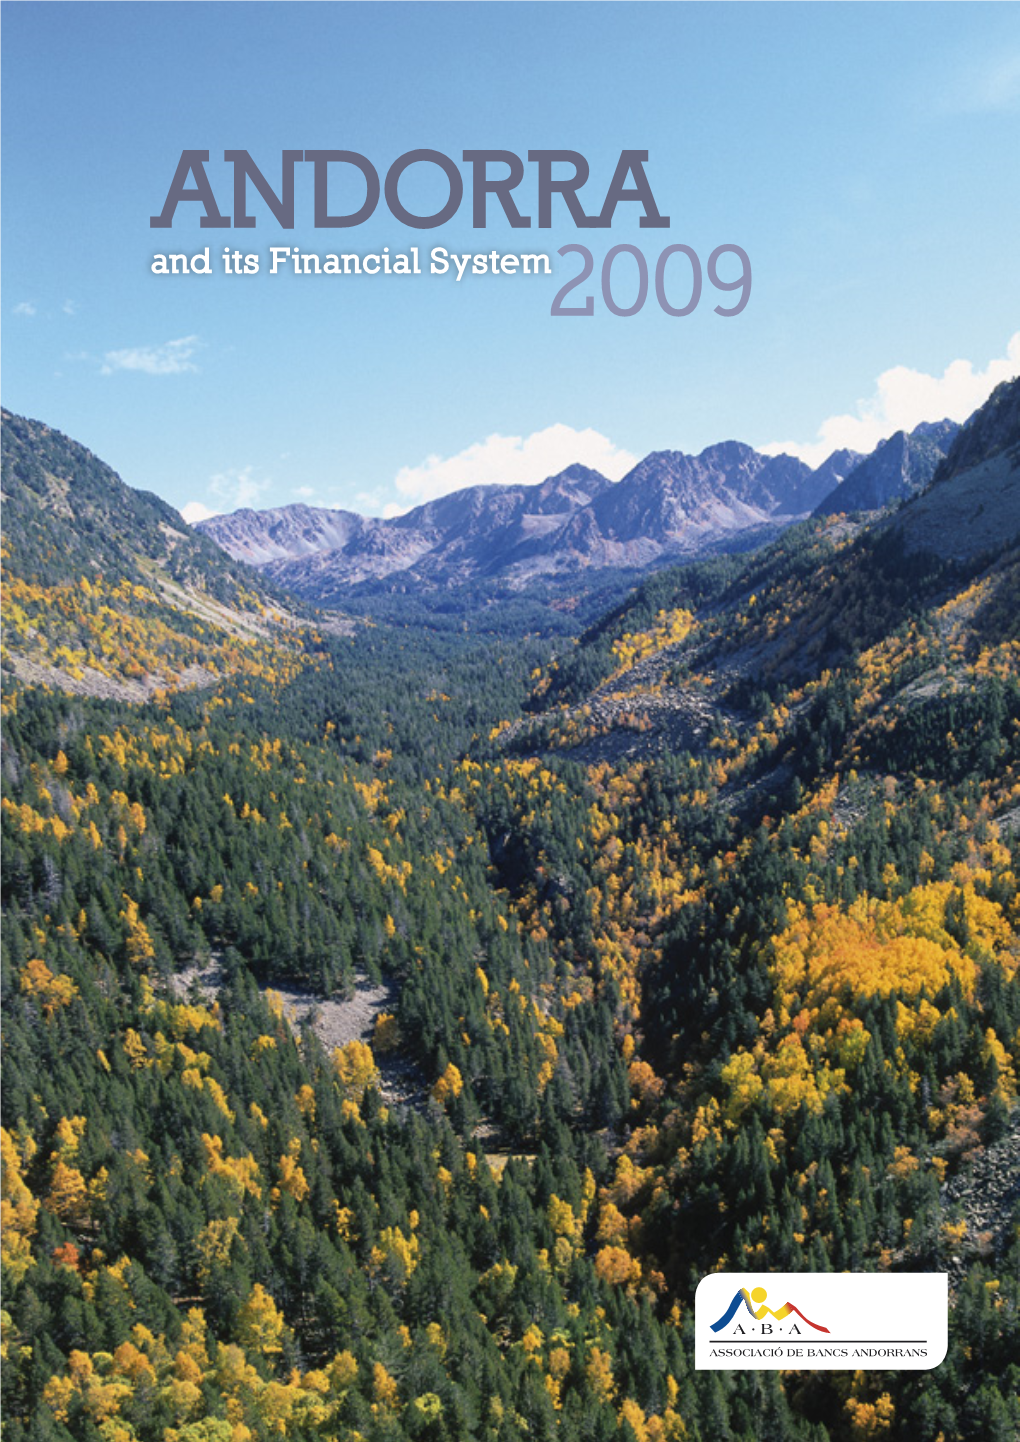 ANDORRA and Its Financial System 2009